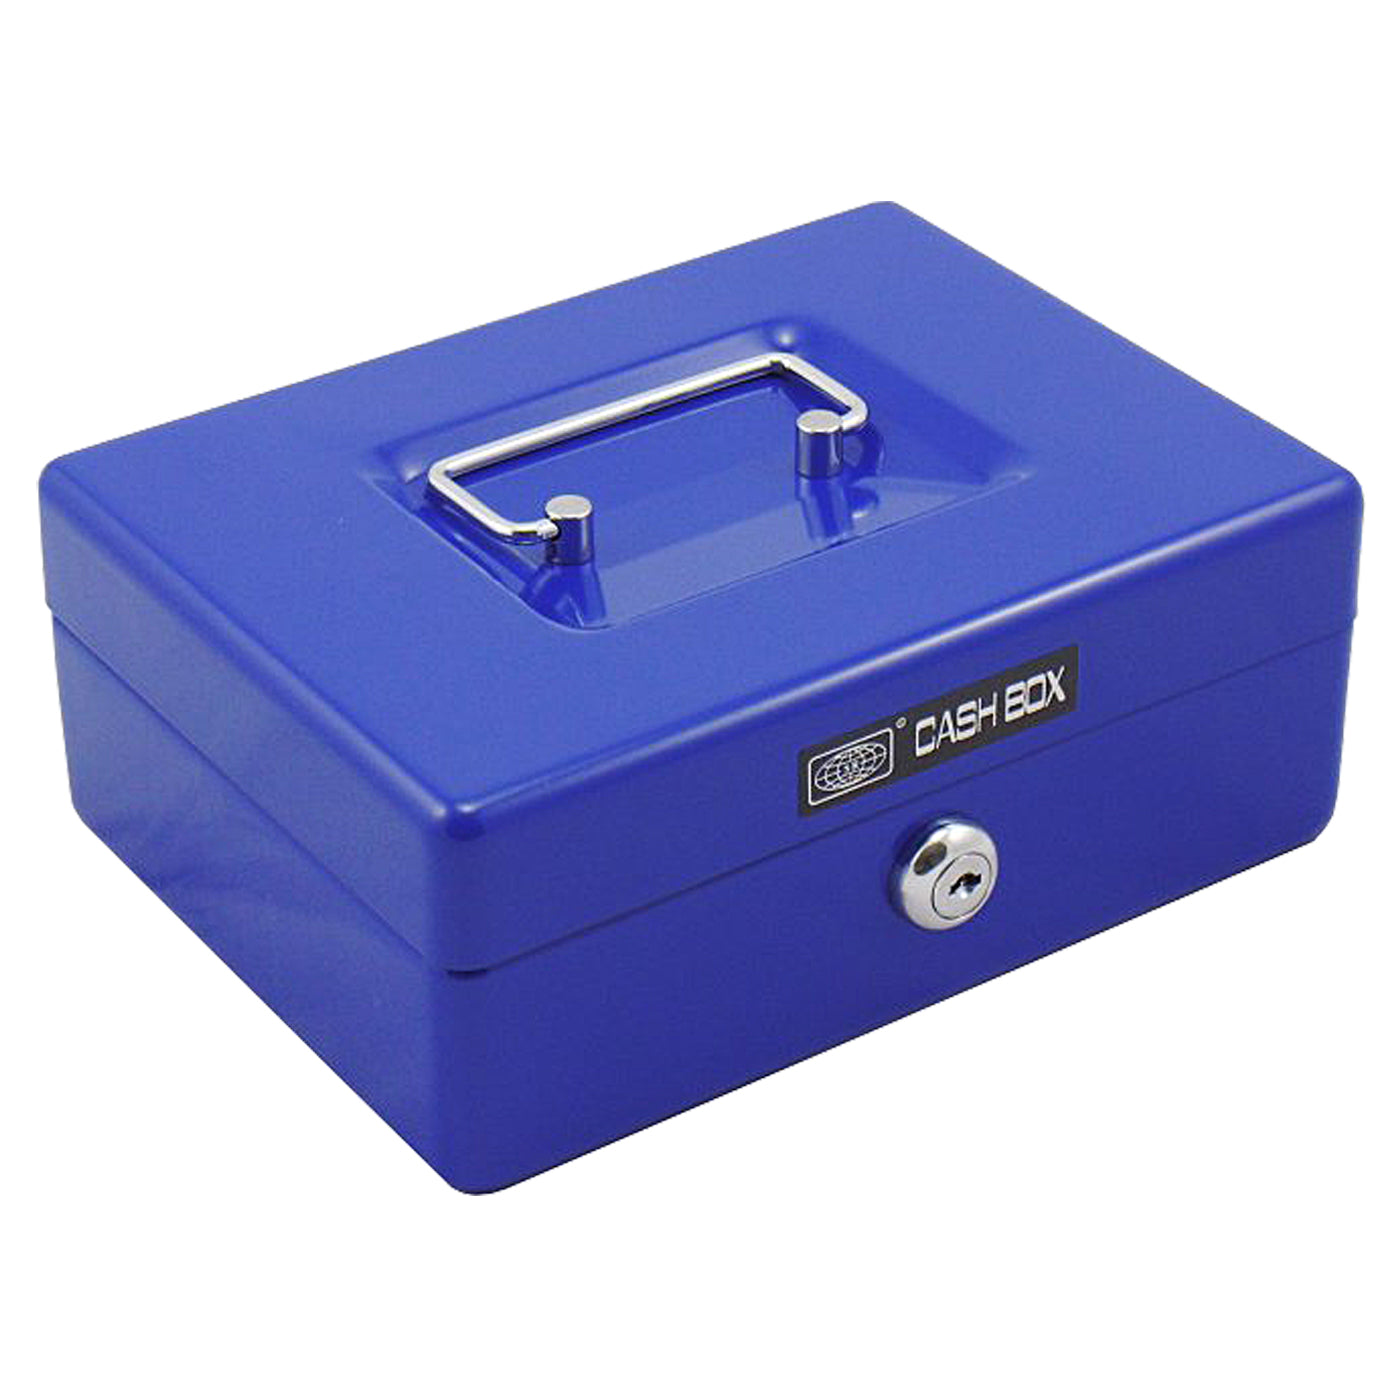 Office Mate Cash Box 8 inch Blue with 2 compartments